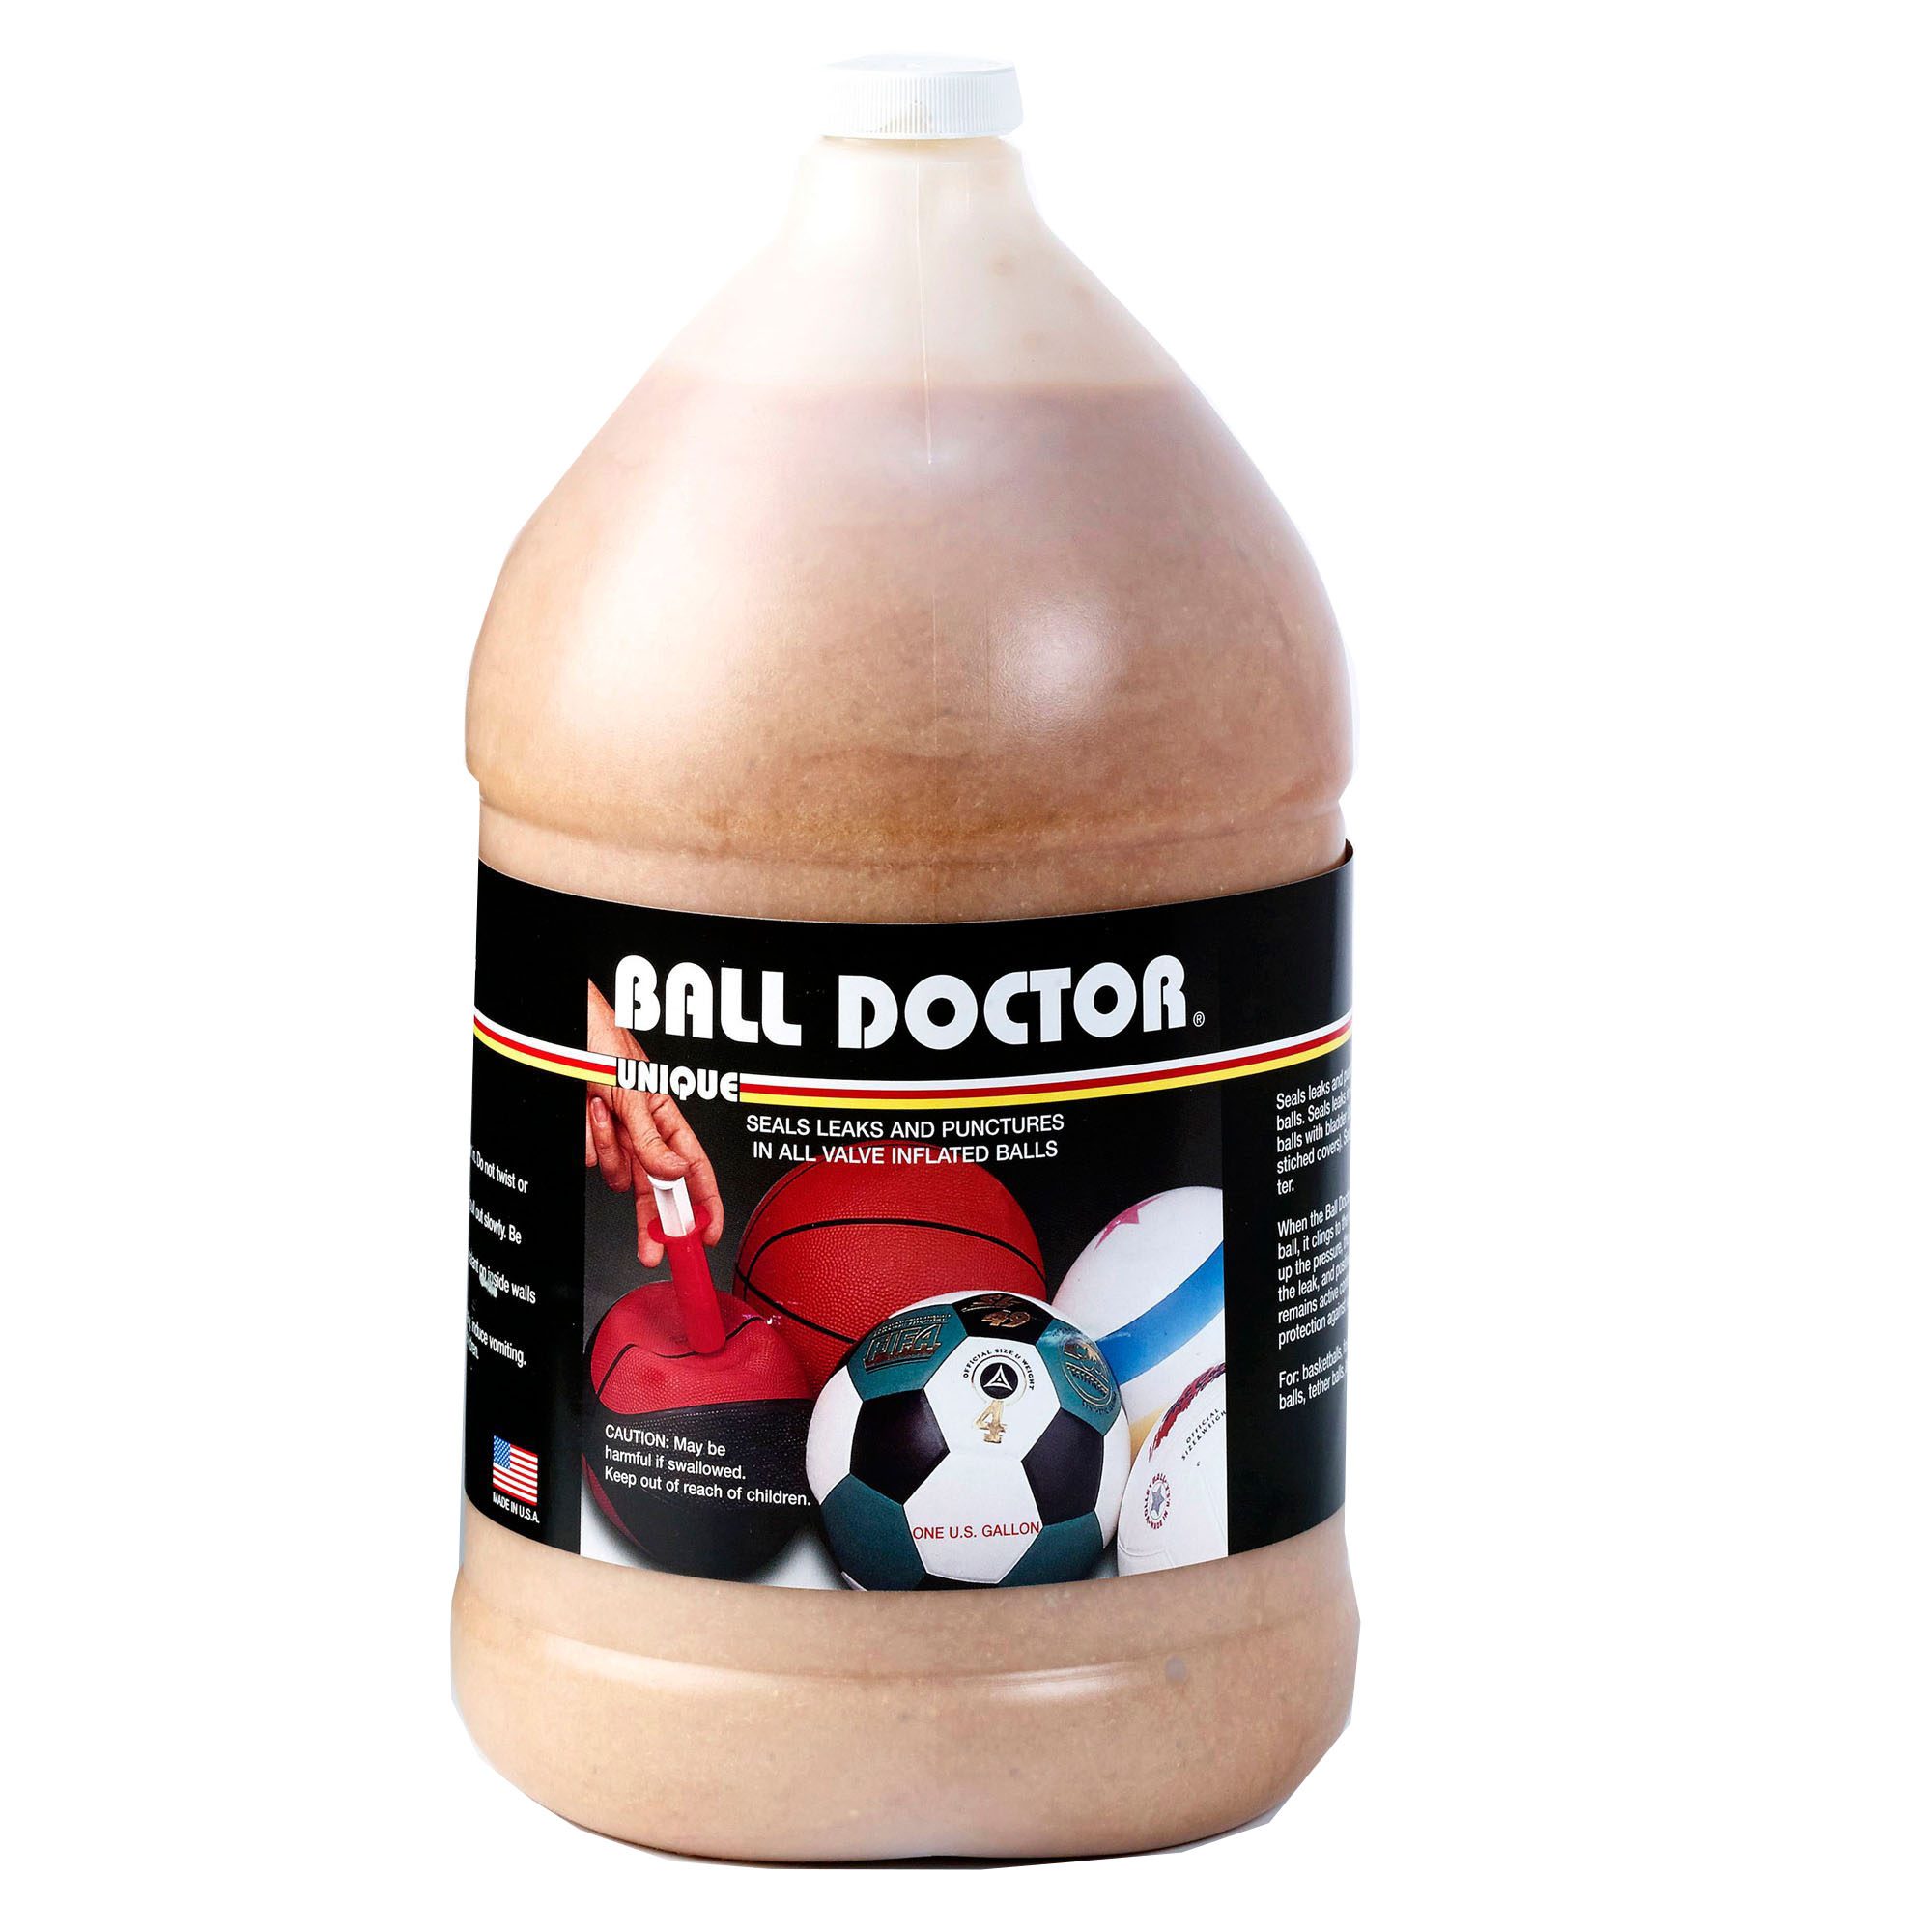 Ball Doctor-Gallon-Repairs up to 120 Balls